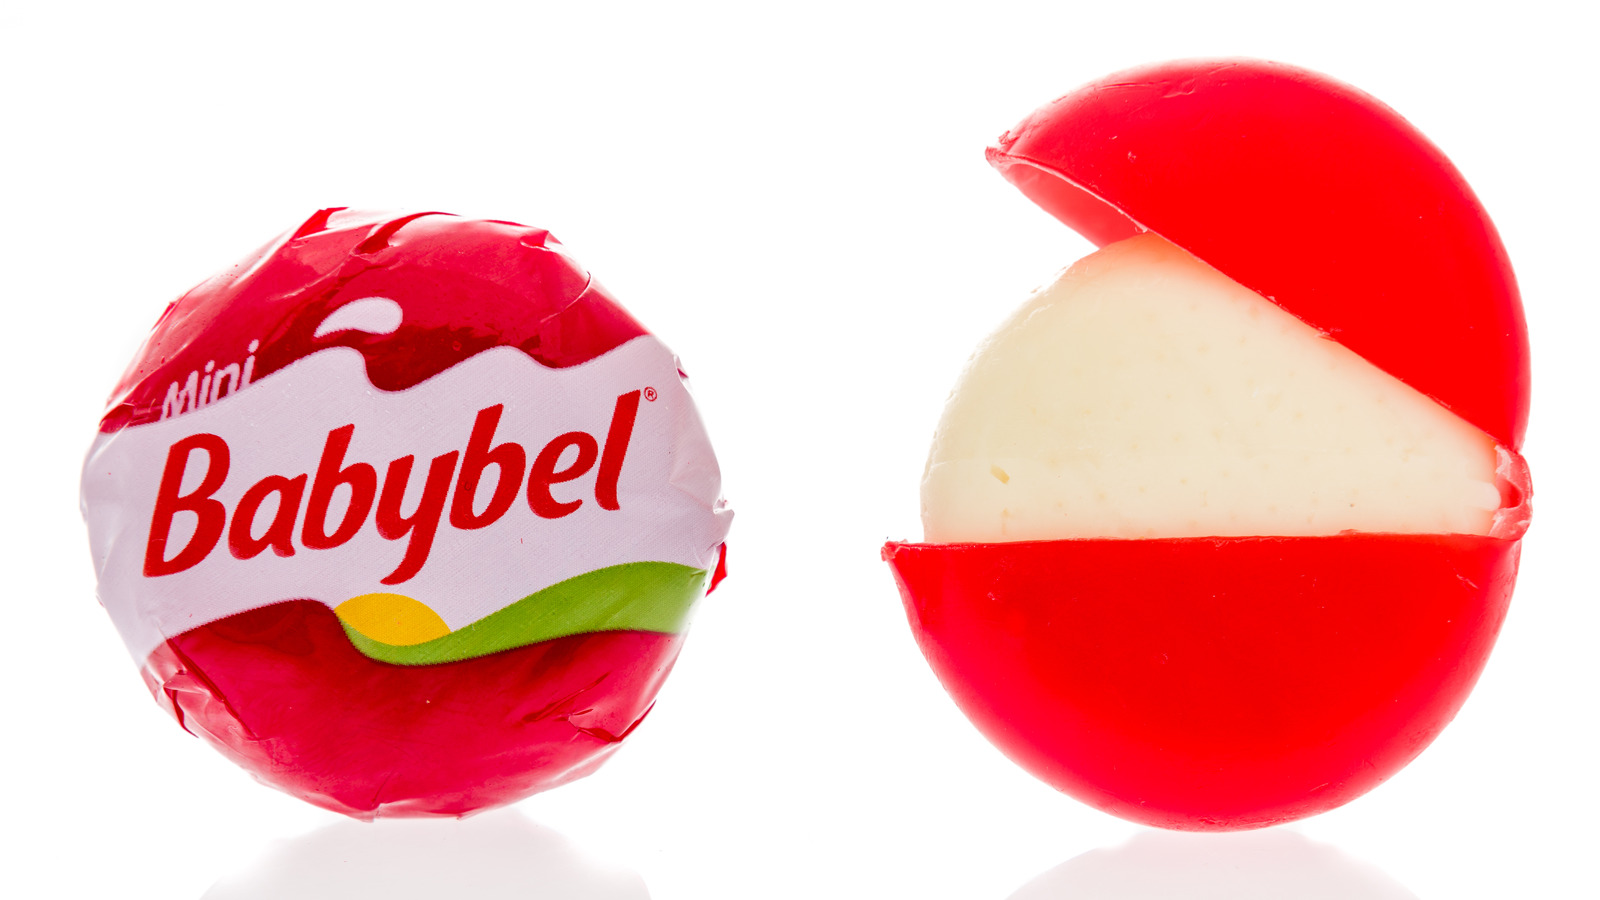 https://www.mashed.com/img/gallery/babybel-cheese-facts-about-the-popular-snack-food/l-intro-1680019267.jpg